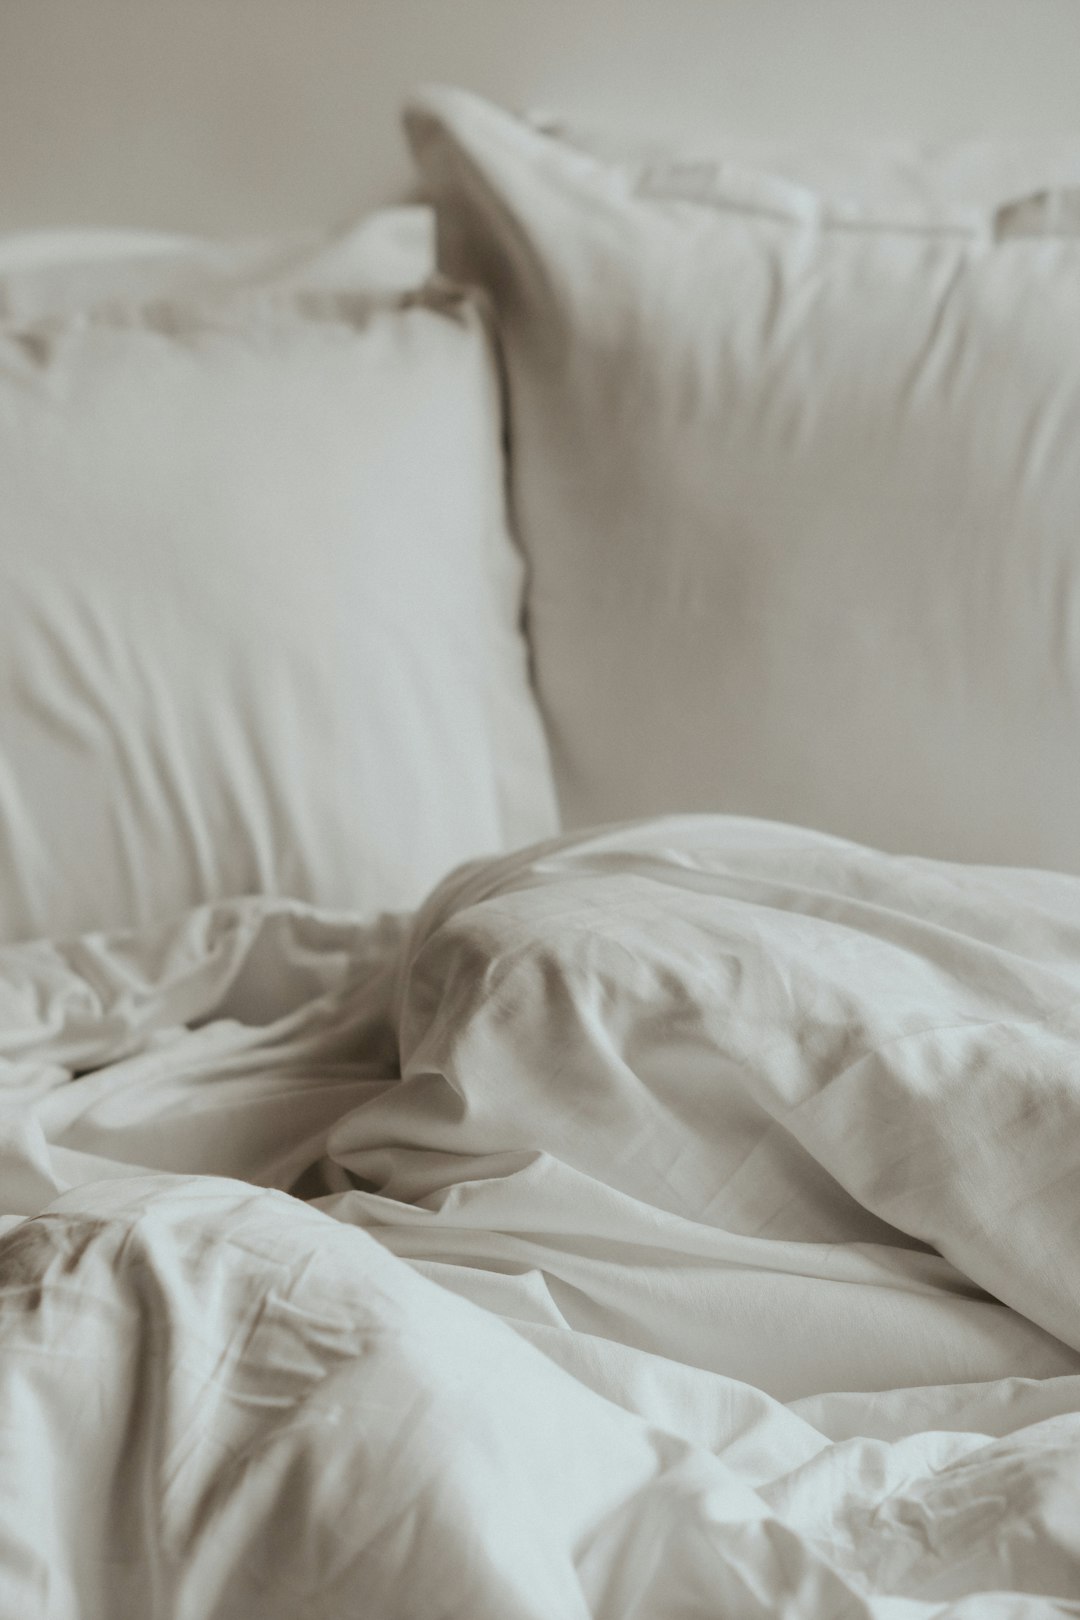 Redefine Your Sleep Routine: 5 Must-Try Hacks for a Restful Night